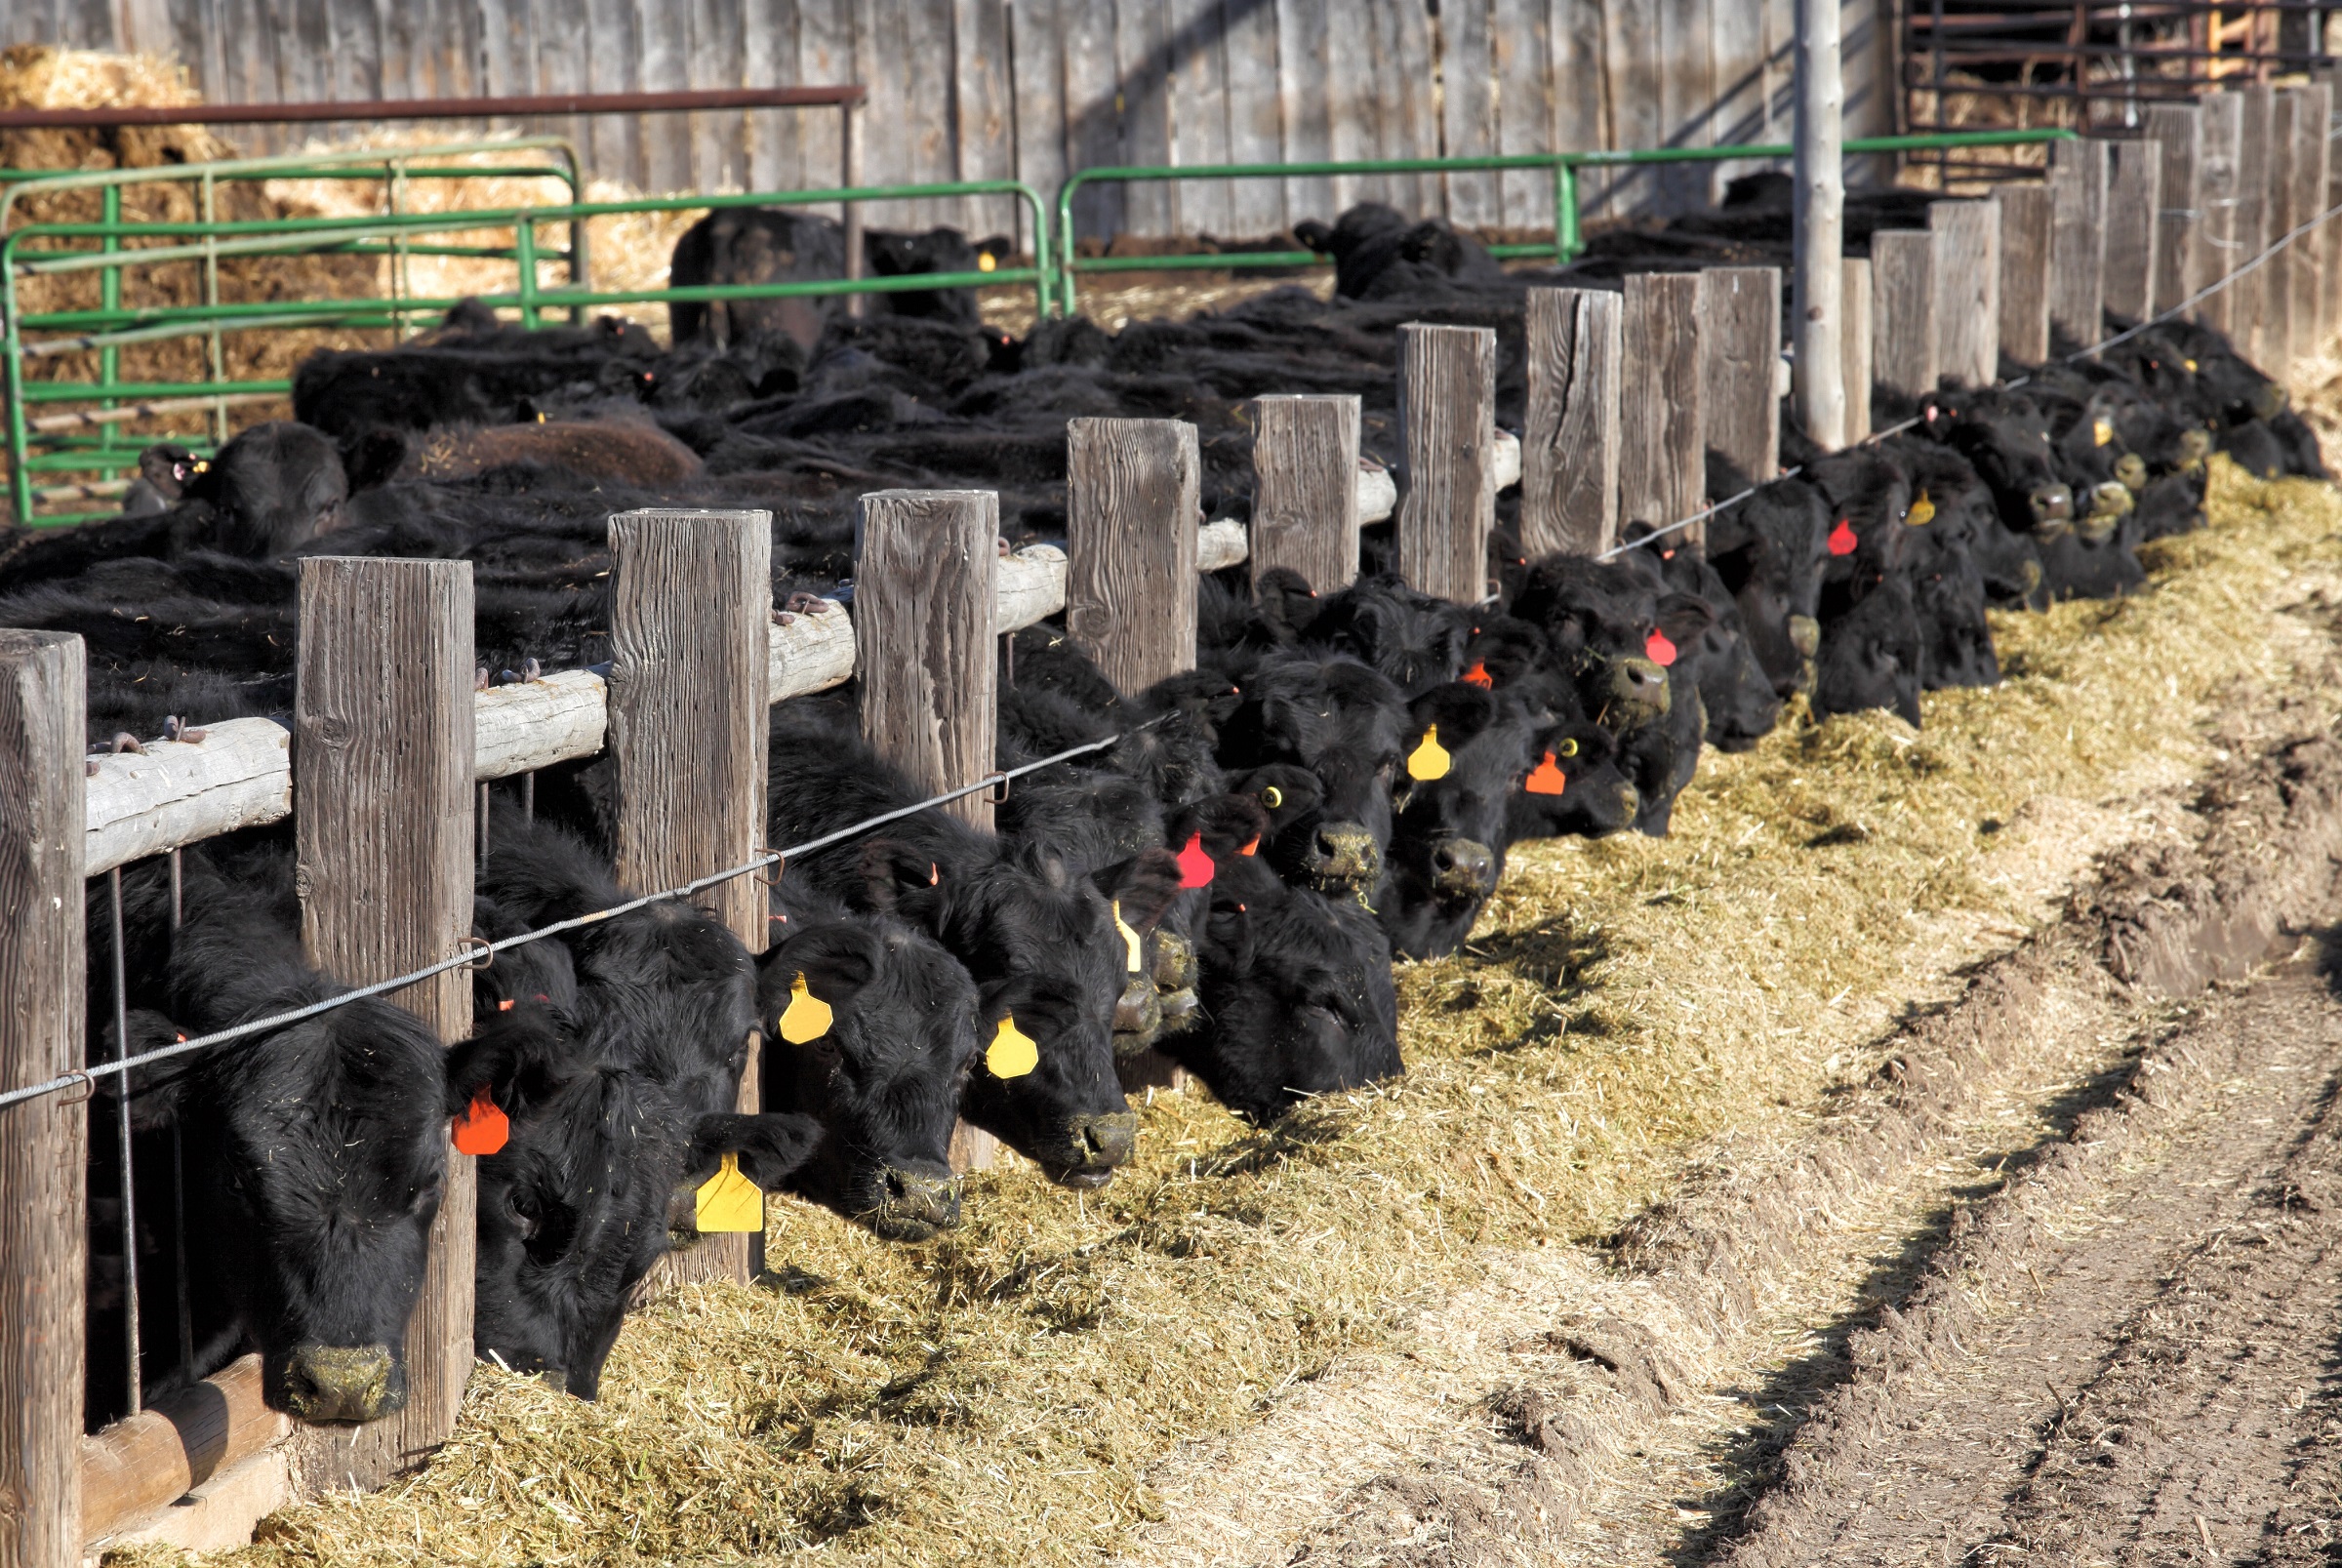 The Rye-SaFe study aims to provide evidence that new feeding concepts promote animal health